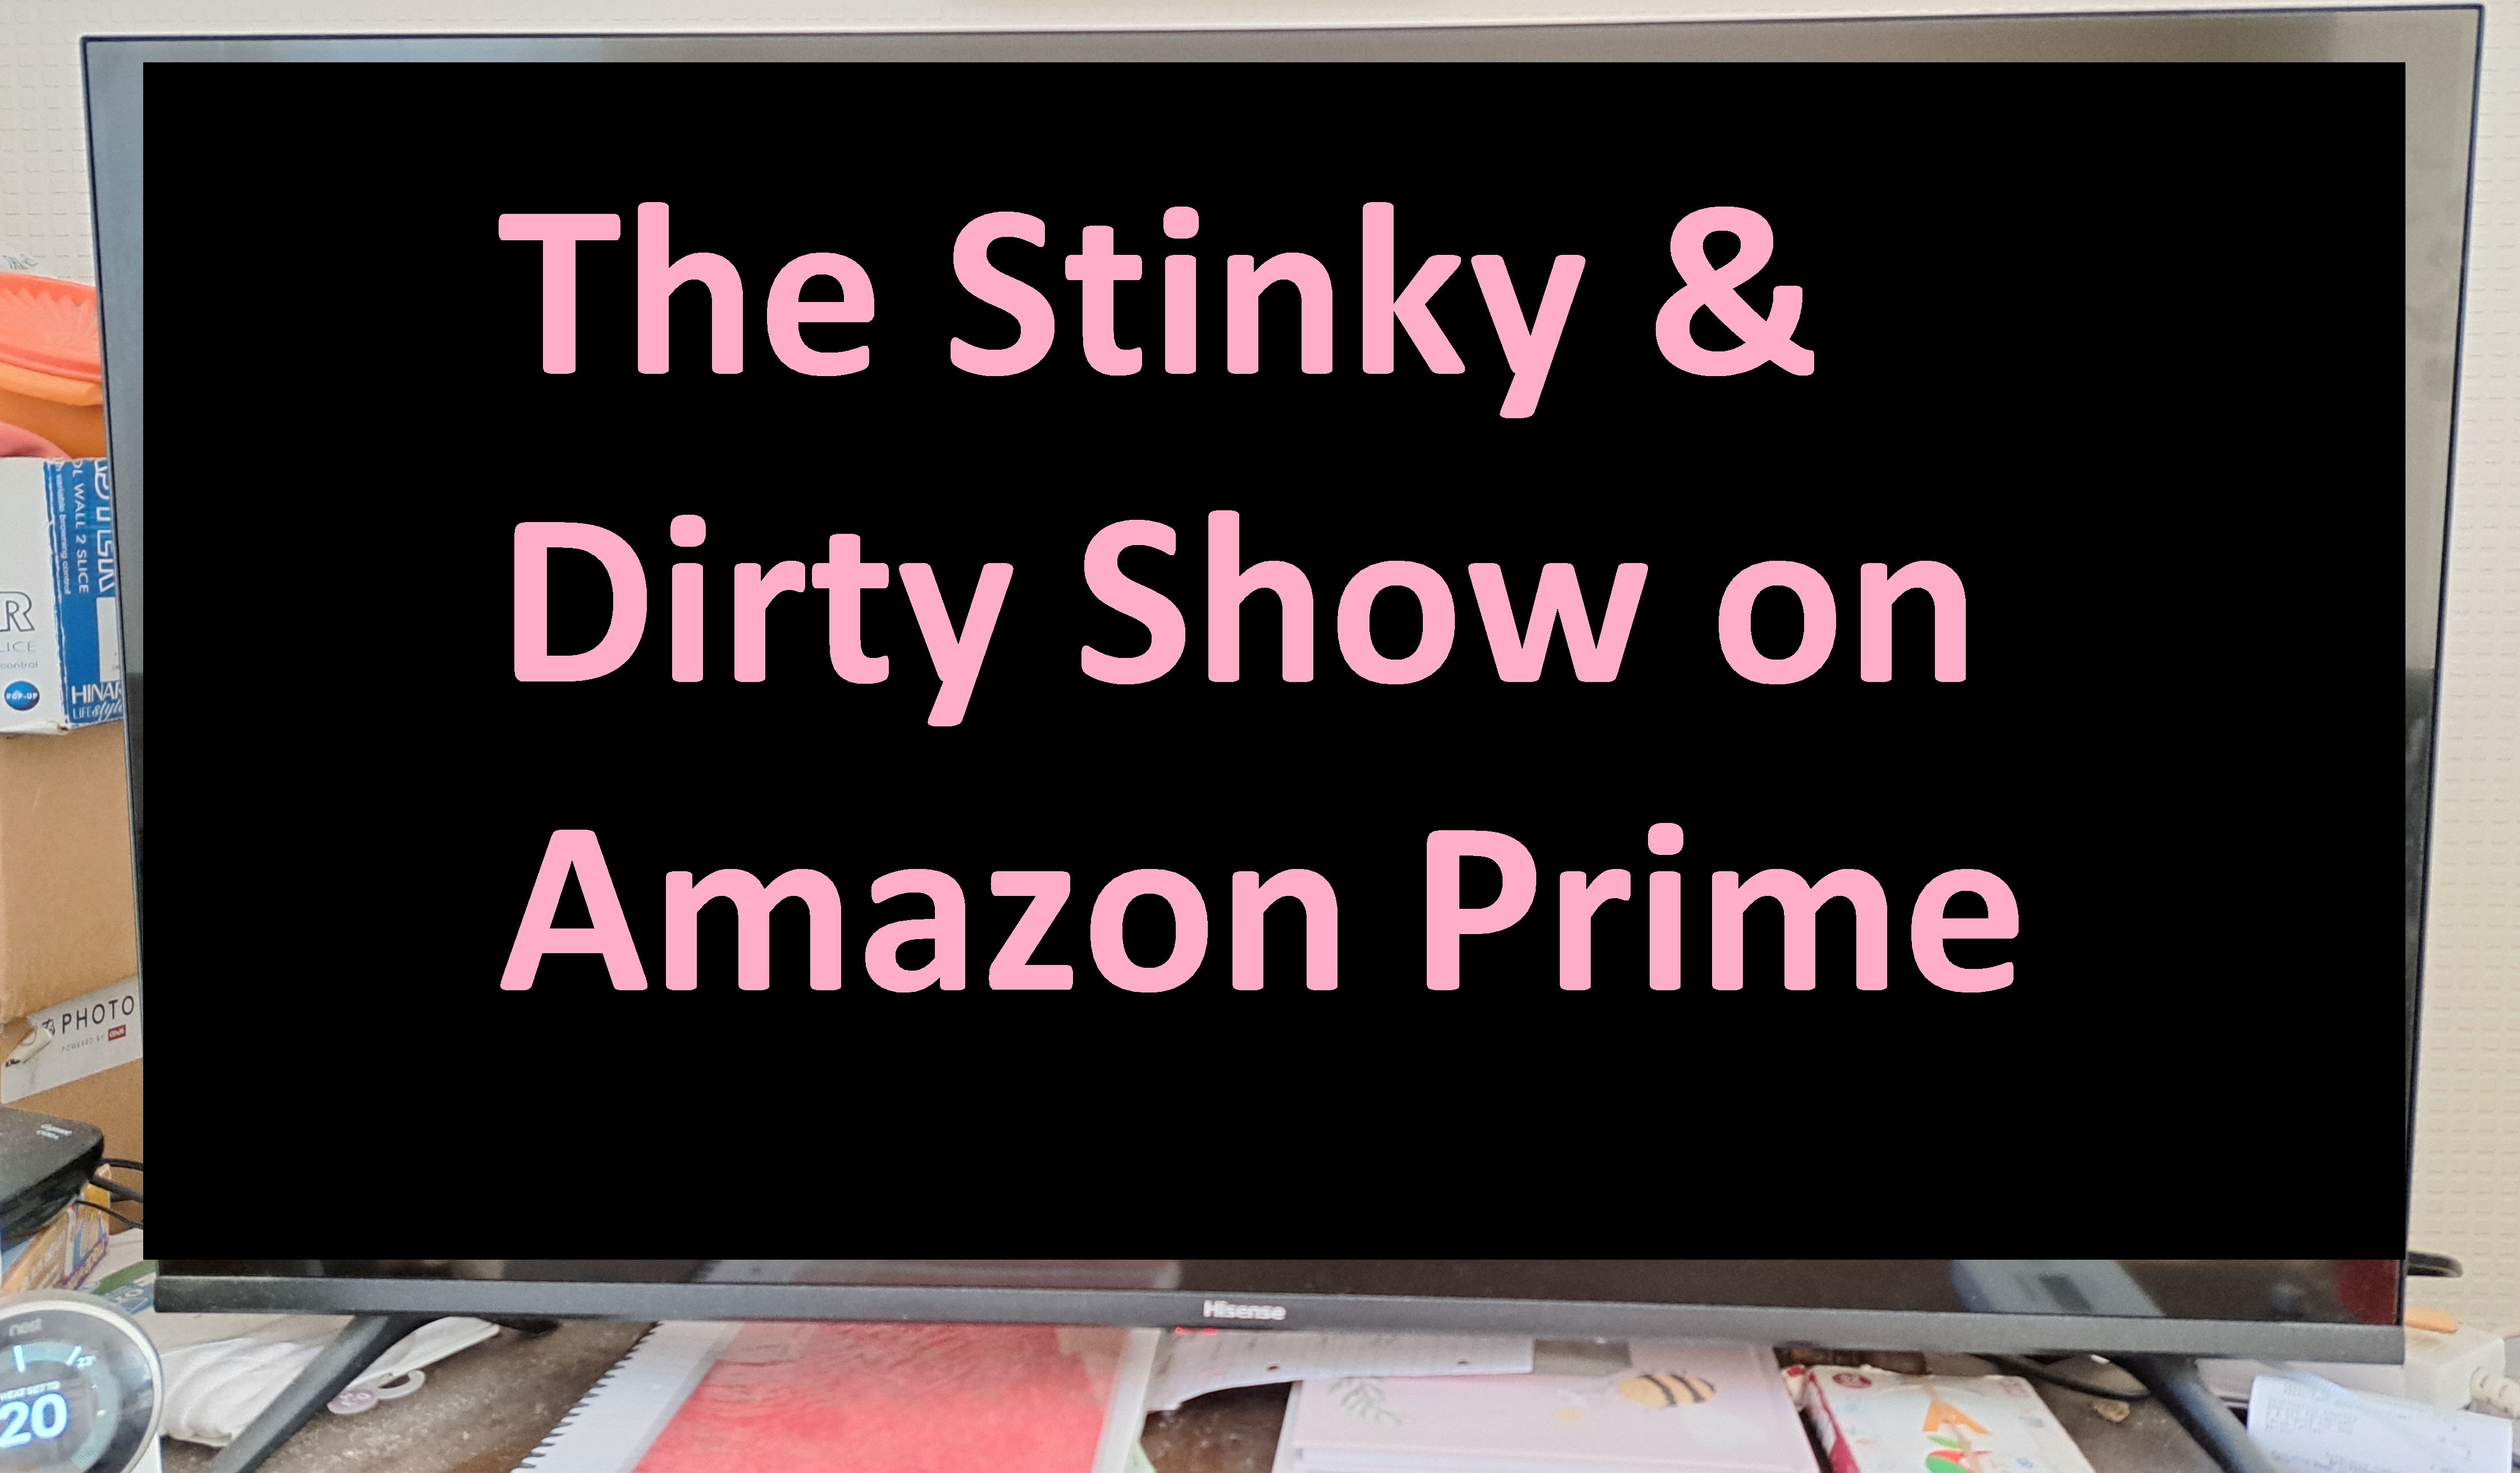 The Stinky & Dirty Show on Amazon Prime